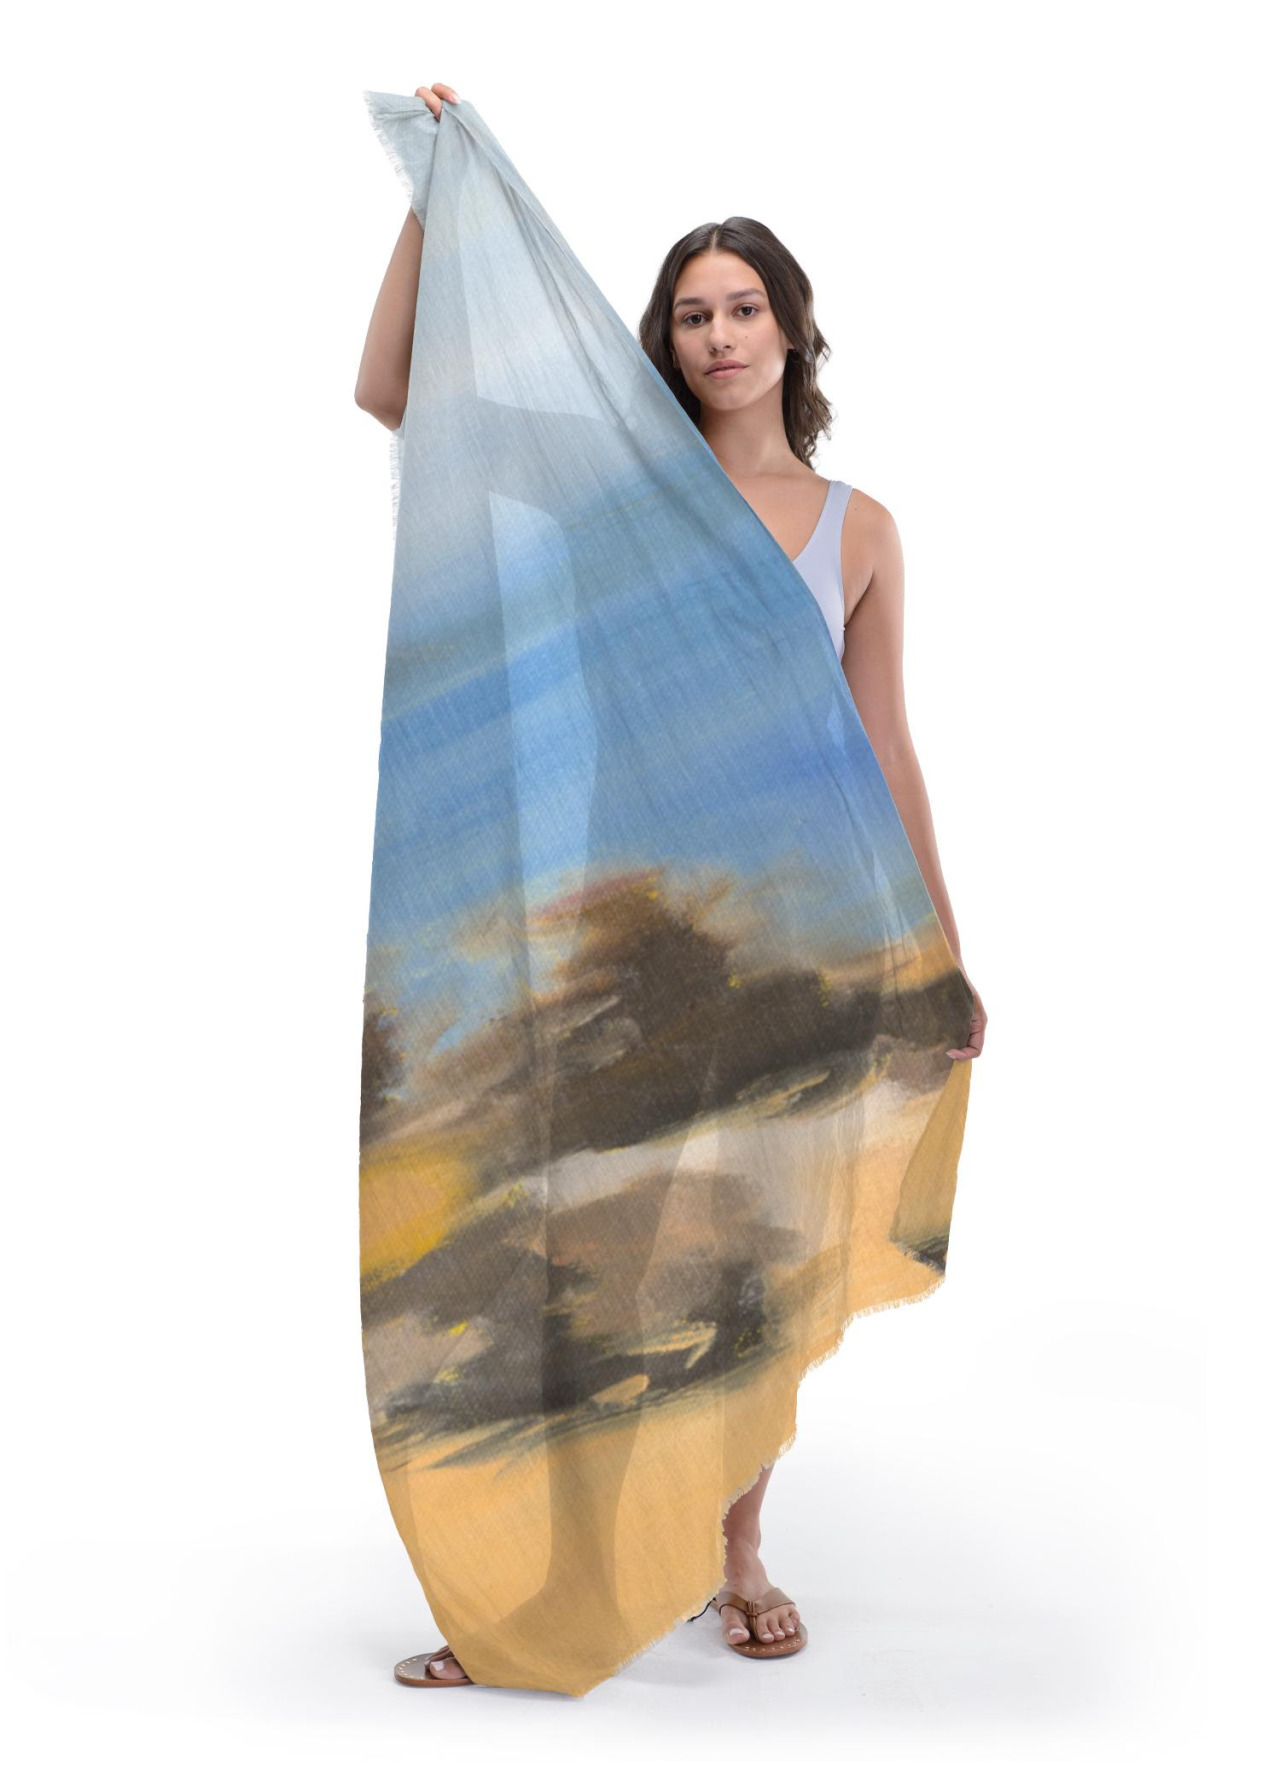 Ane Howard and I am a well-known fine artist that also designs eco-friendly Art-to-Wear. This Earth Day, discover the FABAcollection.com #Ane Howard#faba collection #eco-friendly Art-to-Wear. #streetwear blogging